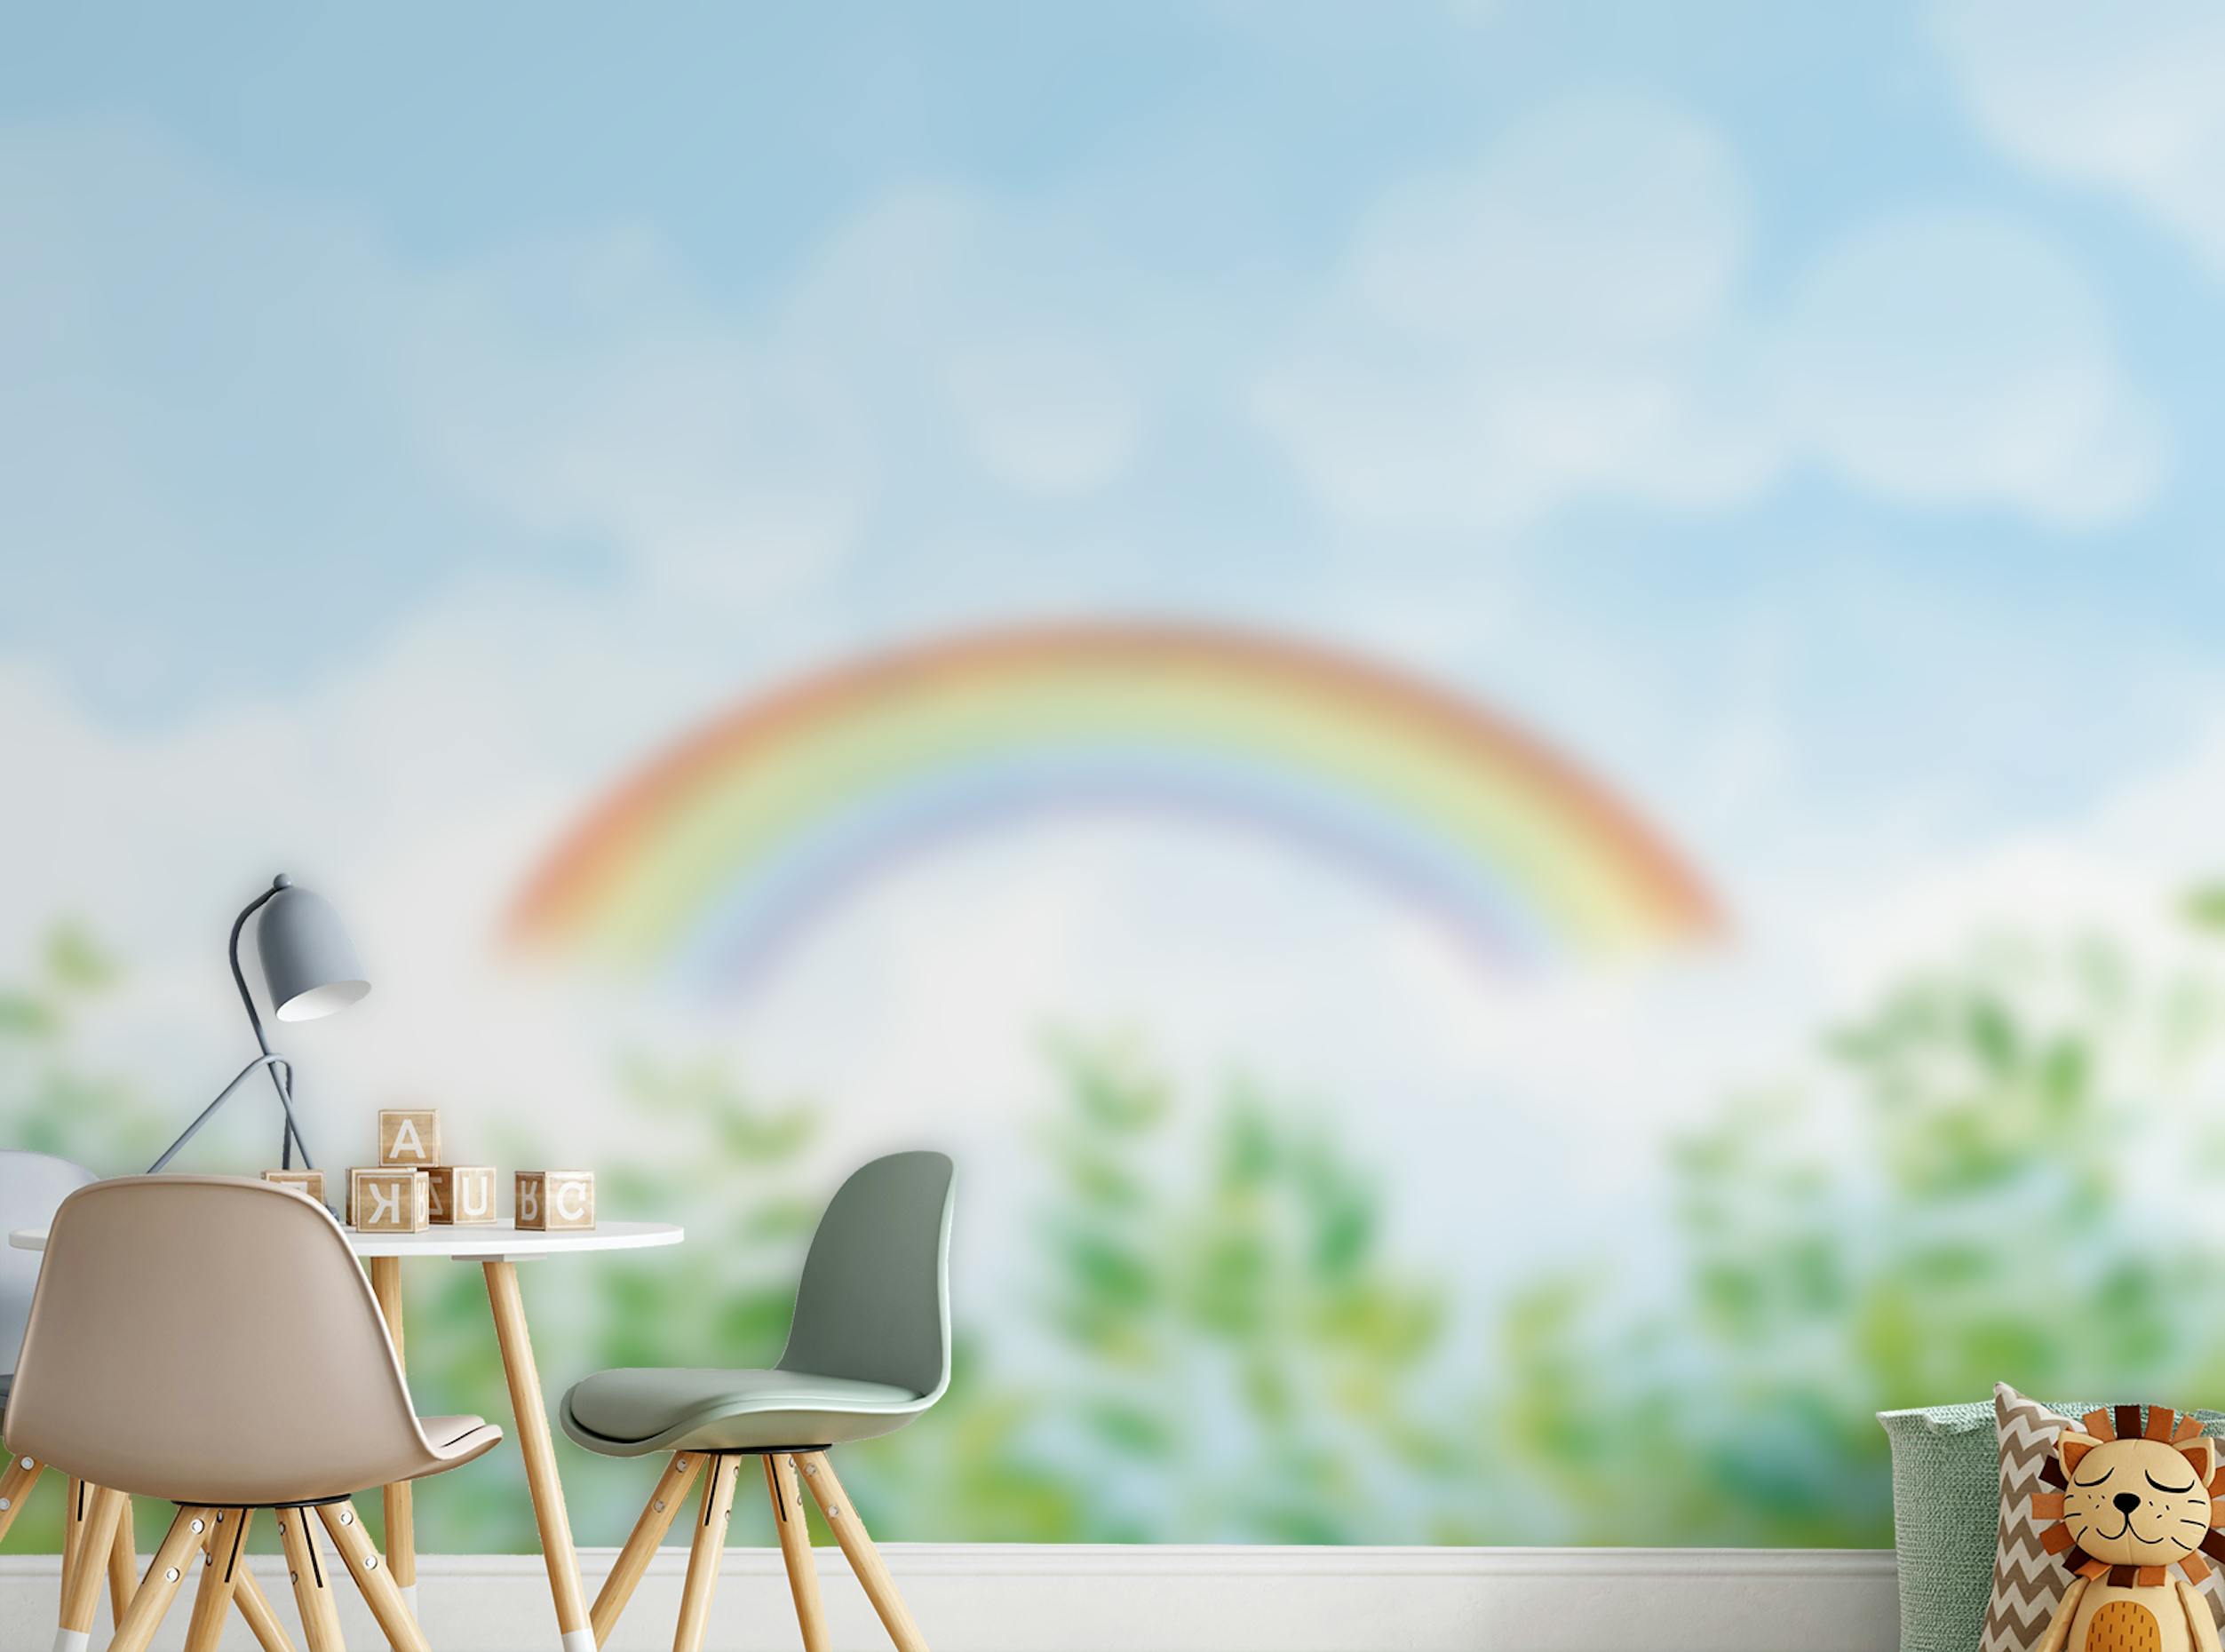 Peel and Stick Blue & Green Watercolor Rainbow Kids Wall Mural